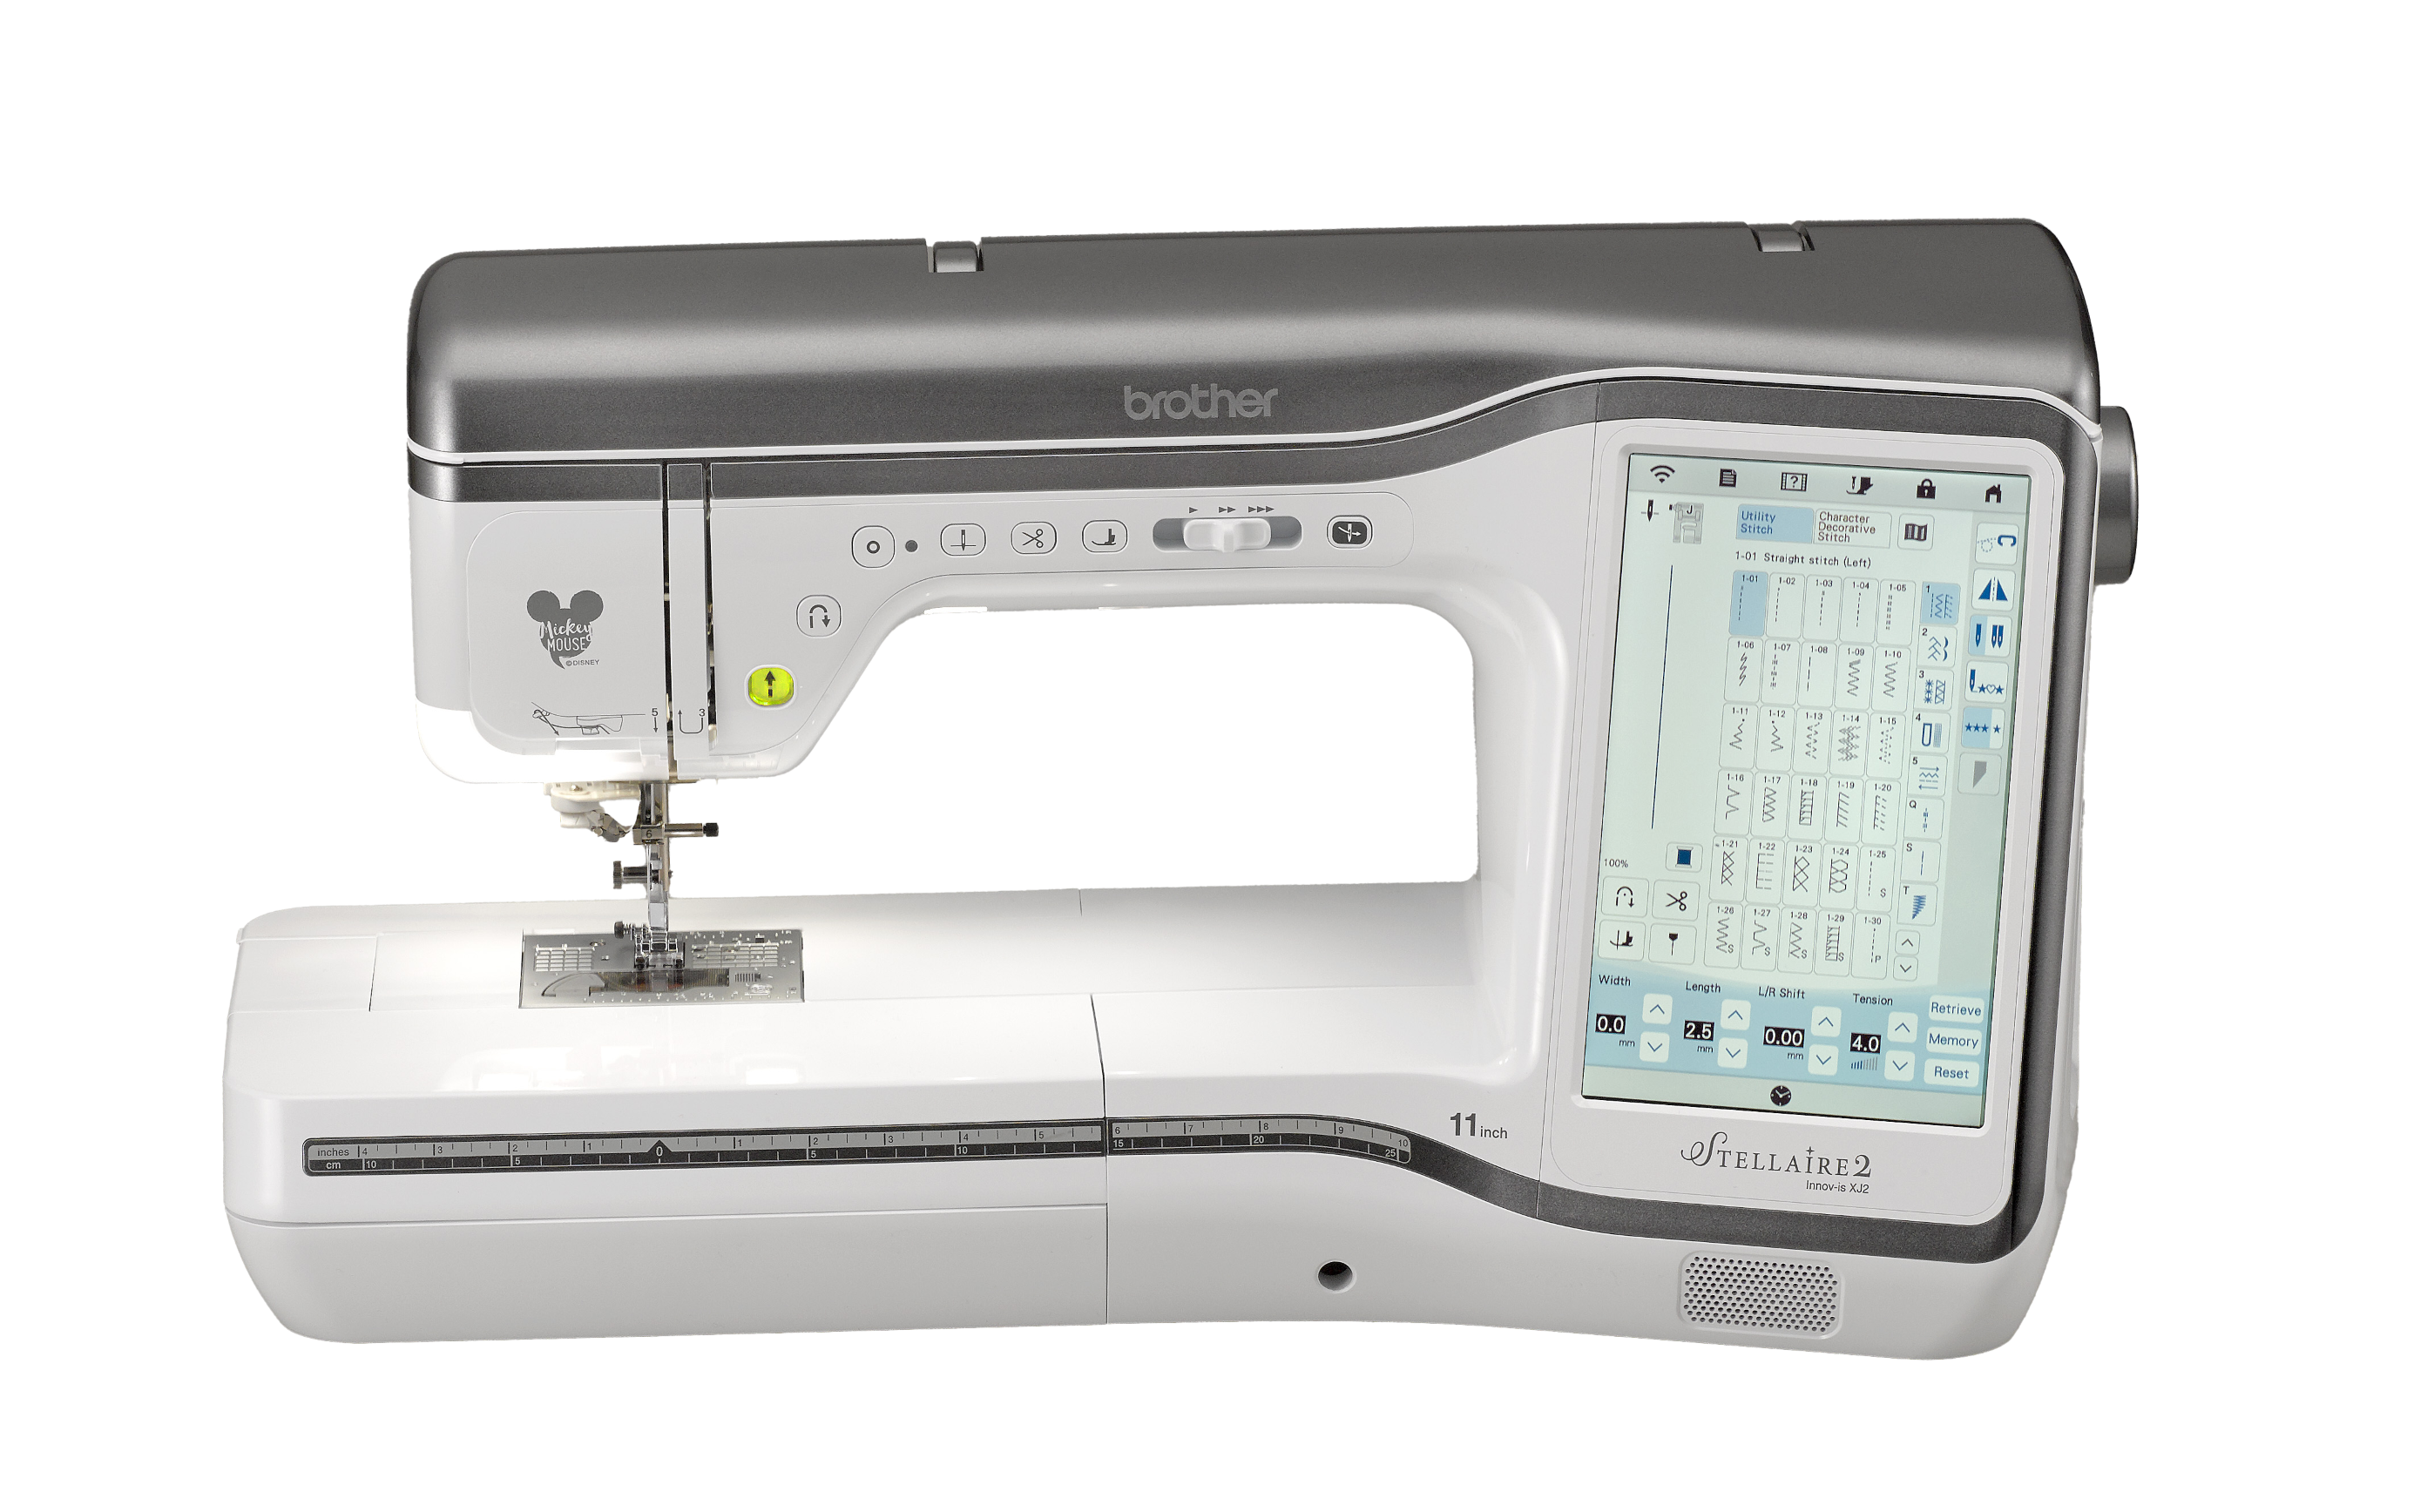 Shop the largest selection of genuine Janome accessories for your new Brother Stellaire Innov-is XJ1 or XJ2 Sewing and Embroidery Machine at World Weidner!